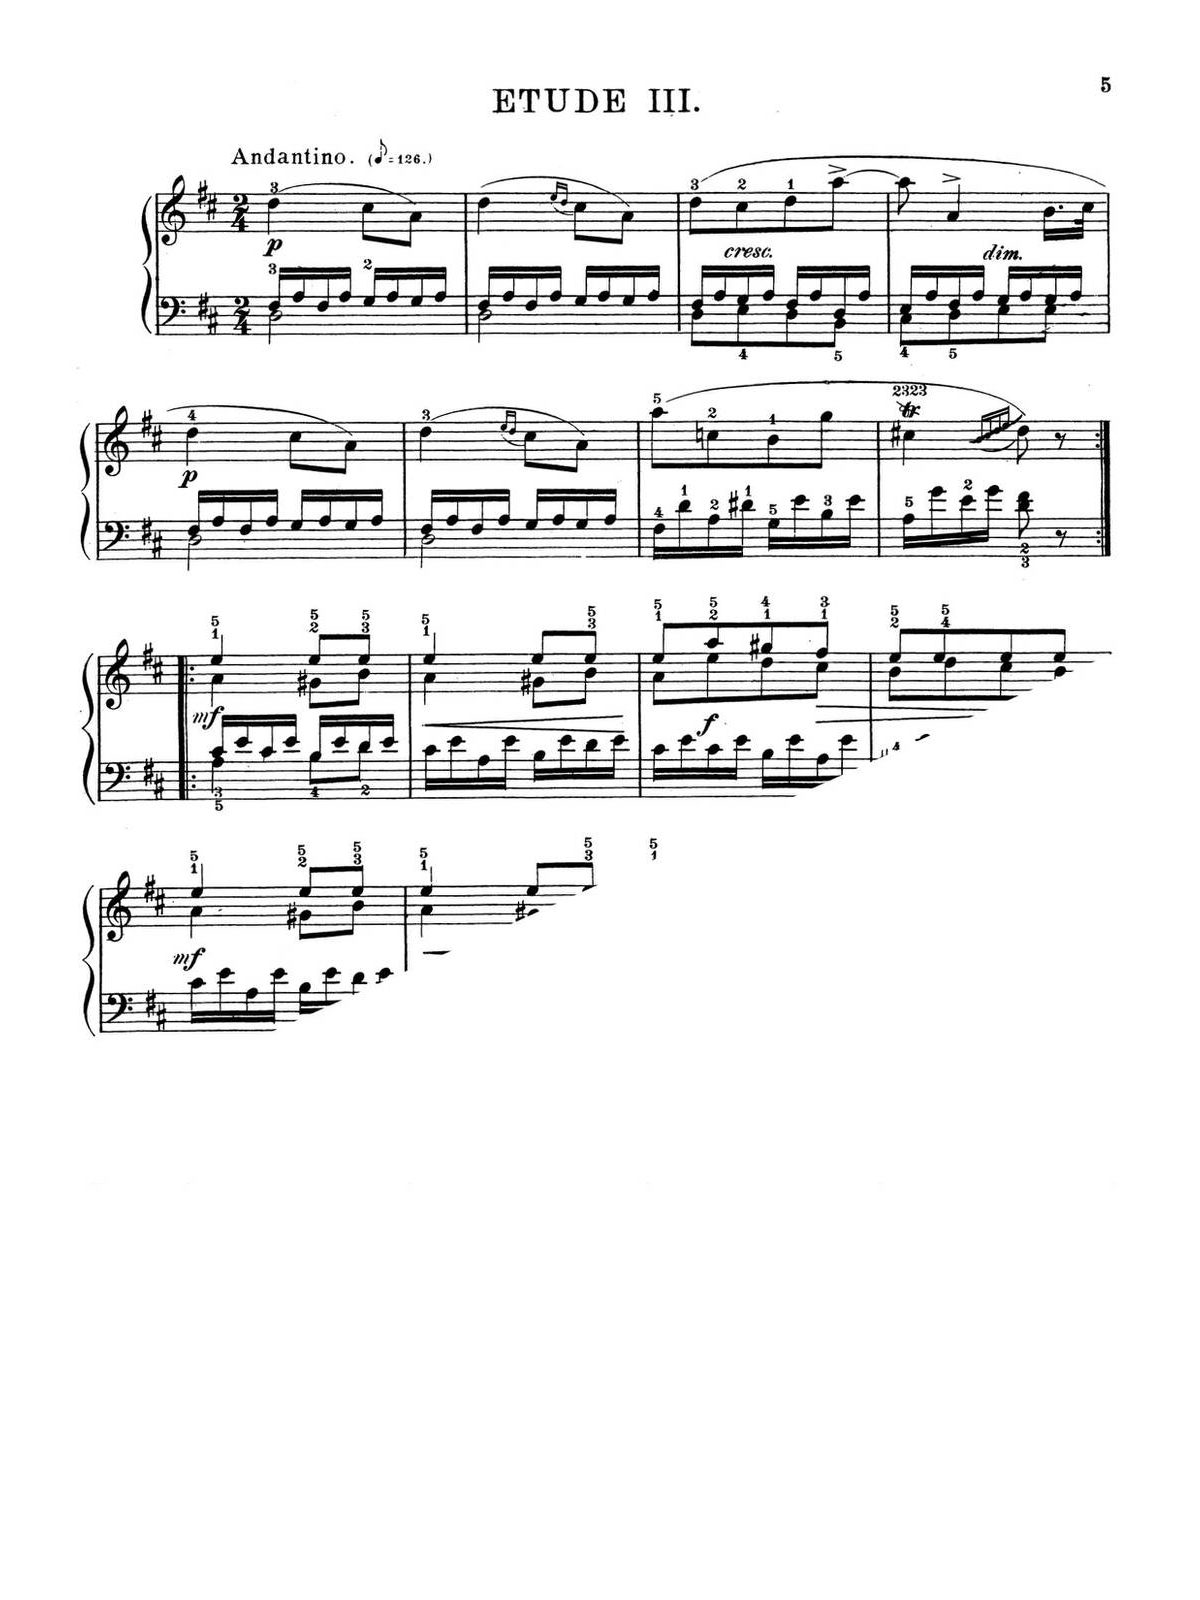 Bertini, 25 Easy Etudes Without Octaves for Piano, Op.100-p05